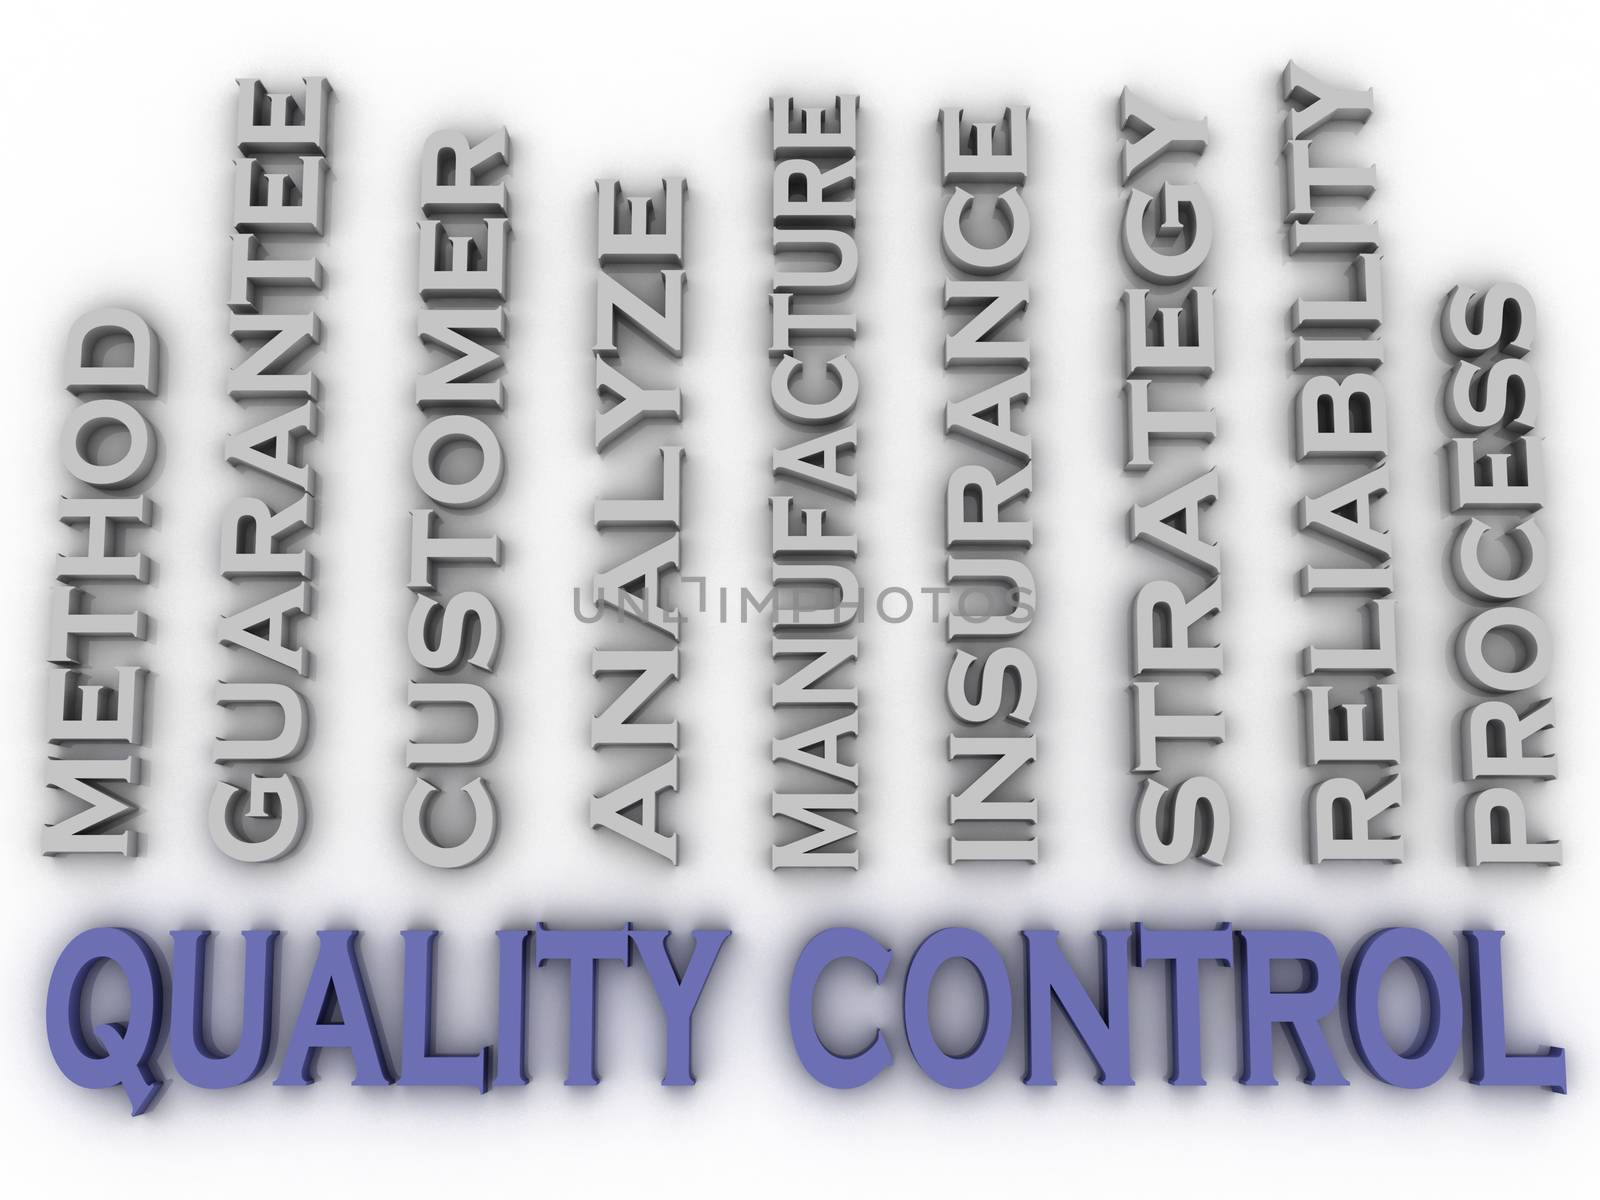 3d image quality control issues concept word cloud background by dacasdo